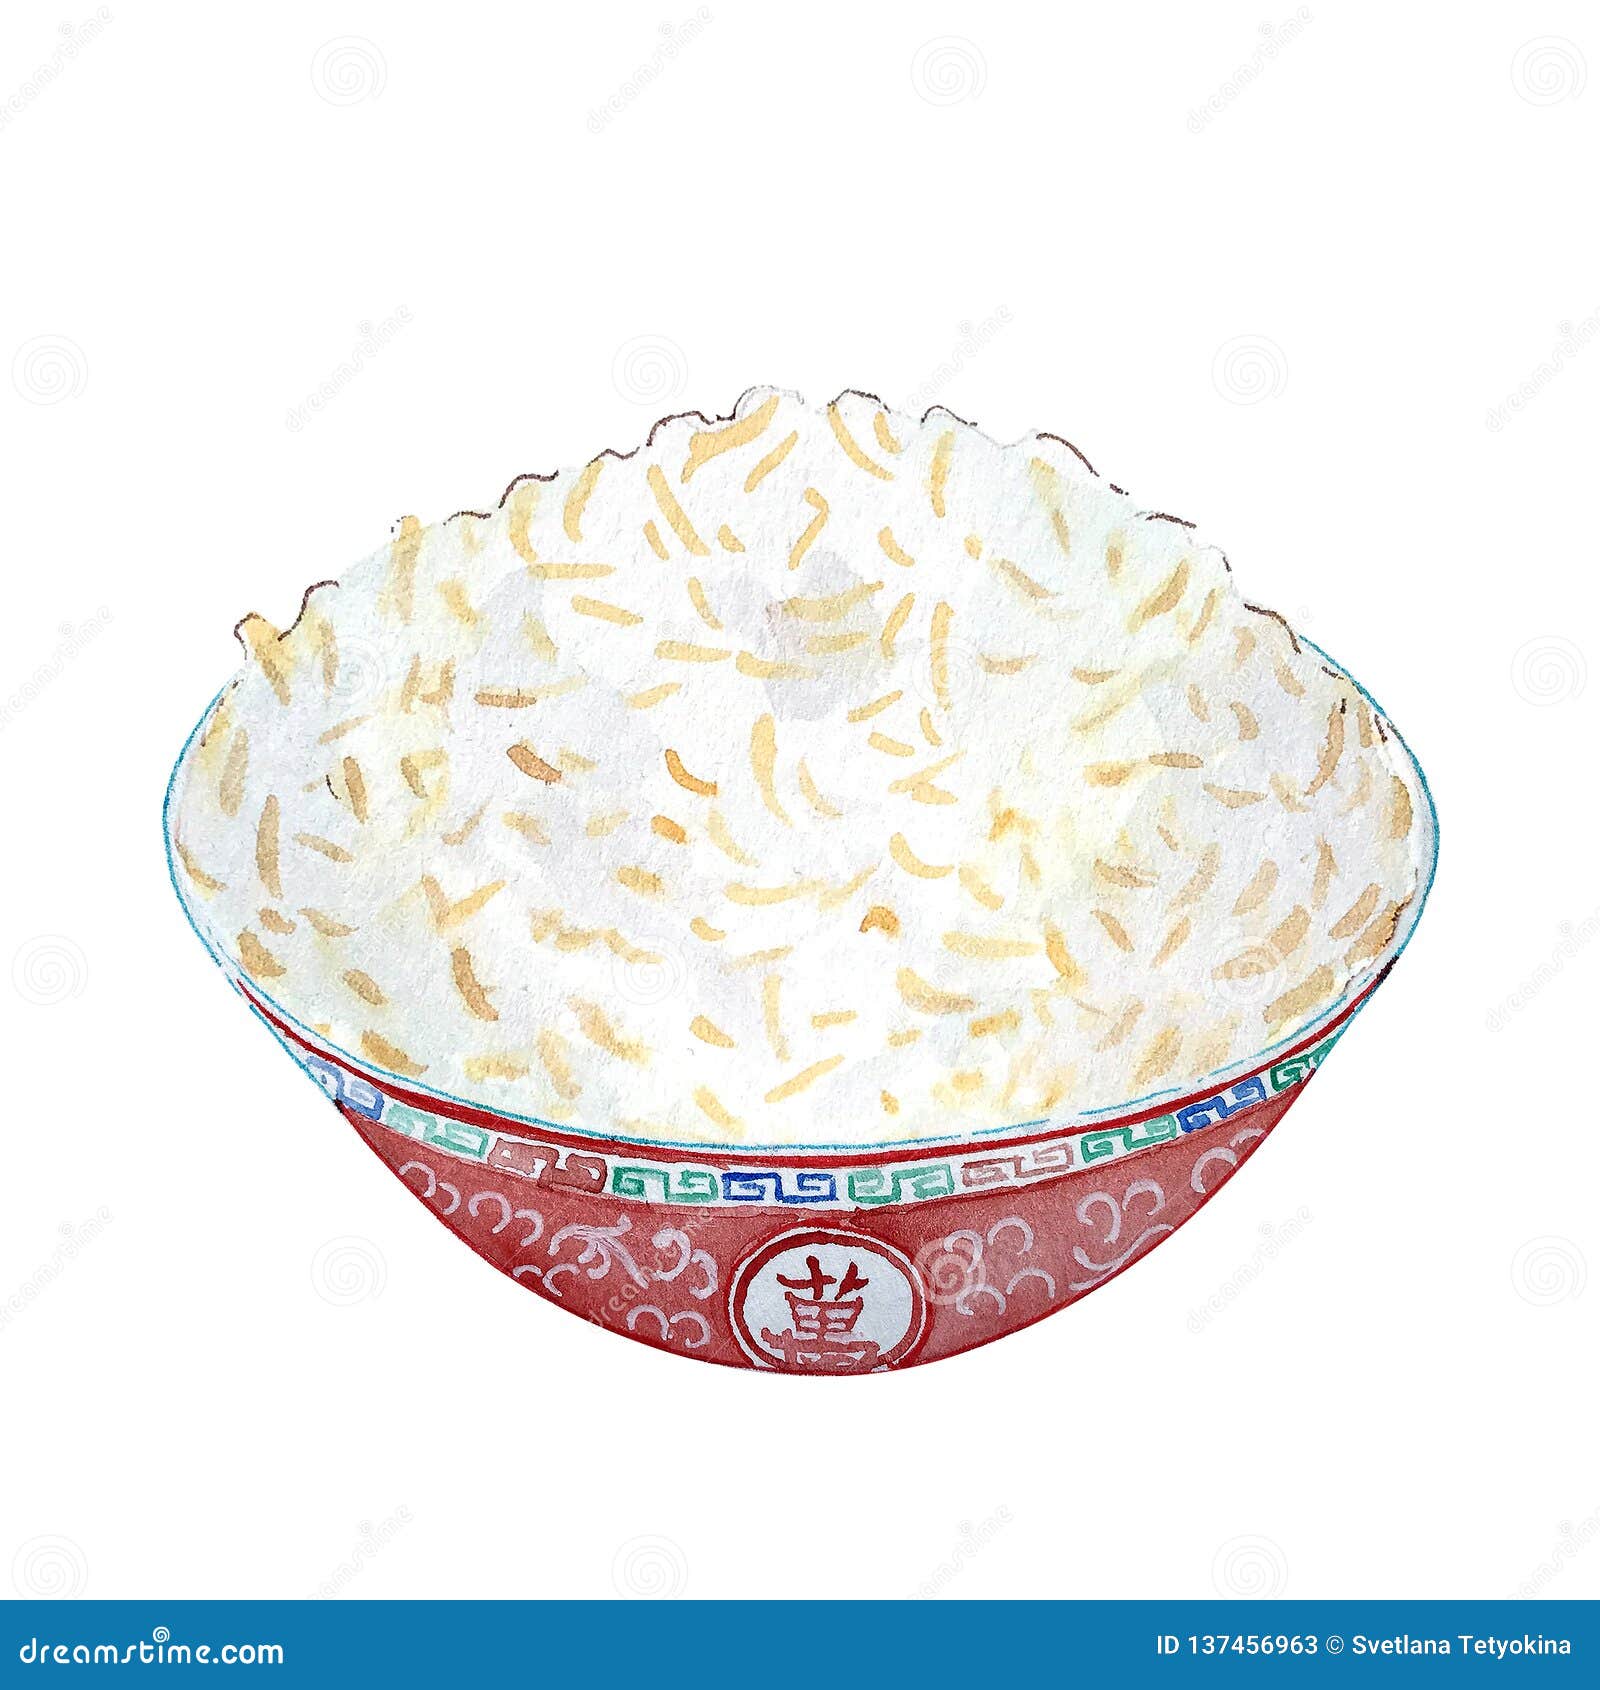 Watercolor bowl of rice isolated on white background. Hand drawn bowl of tasty hot fresh asian chinese, japanese, vietnamese, cambodian rice. Food in decorated red bowl